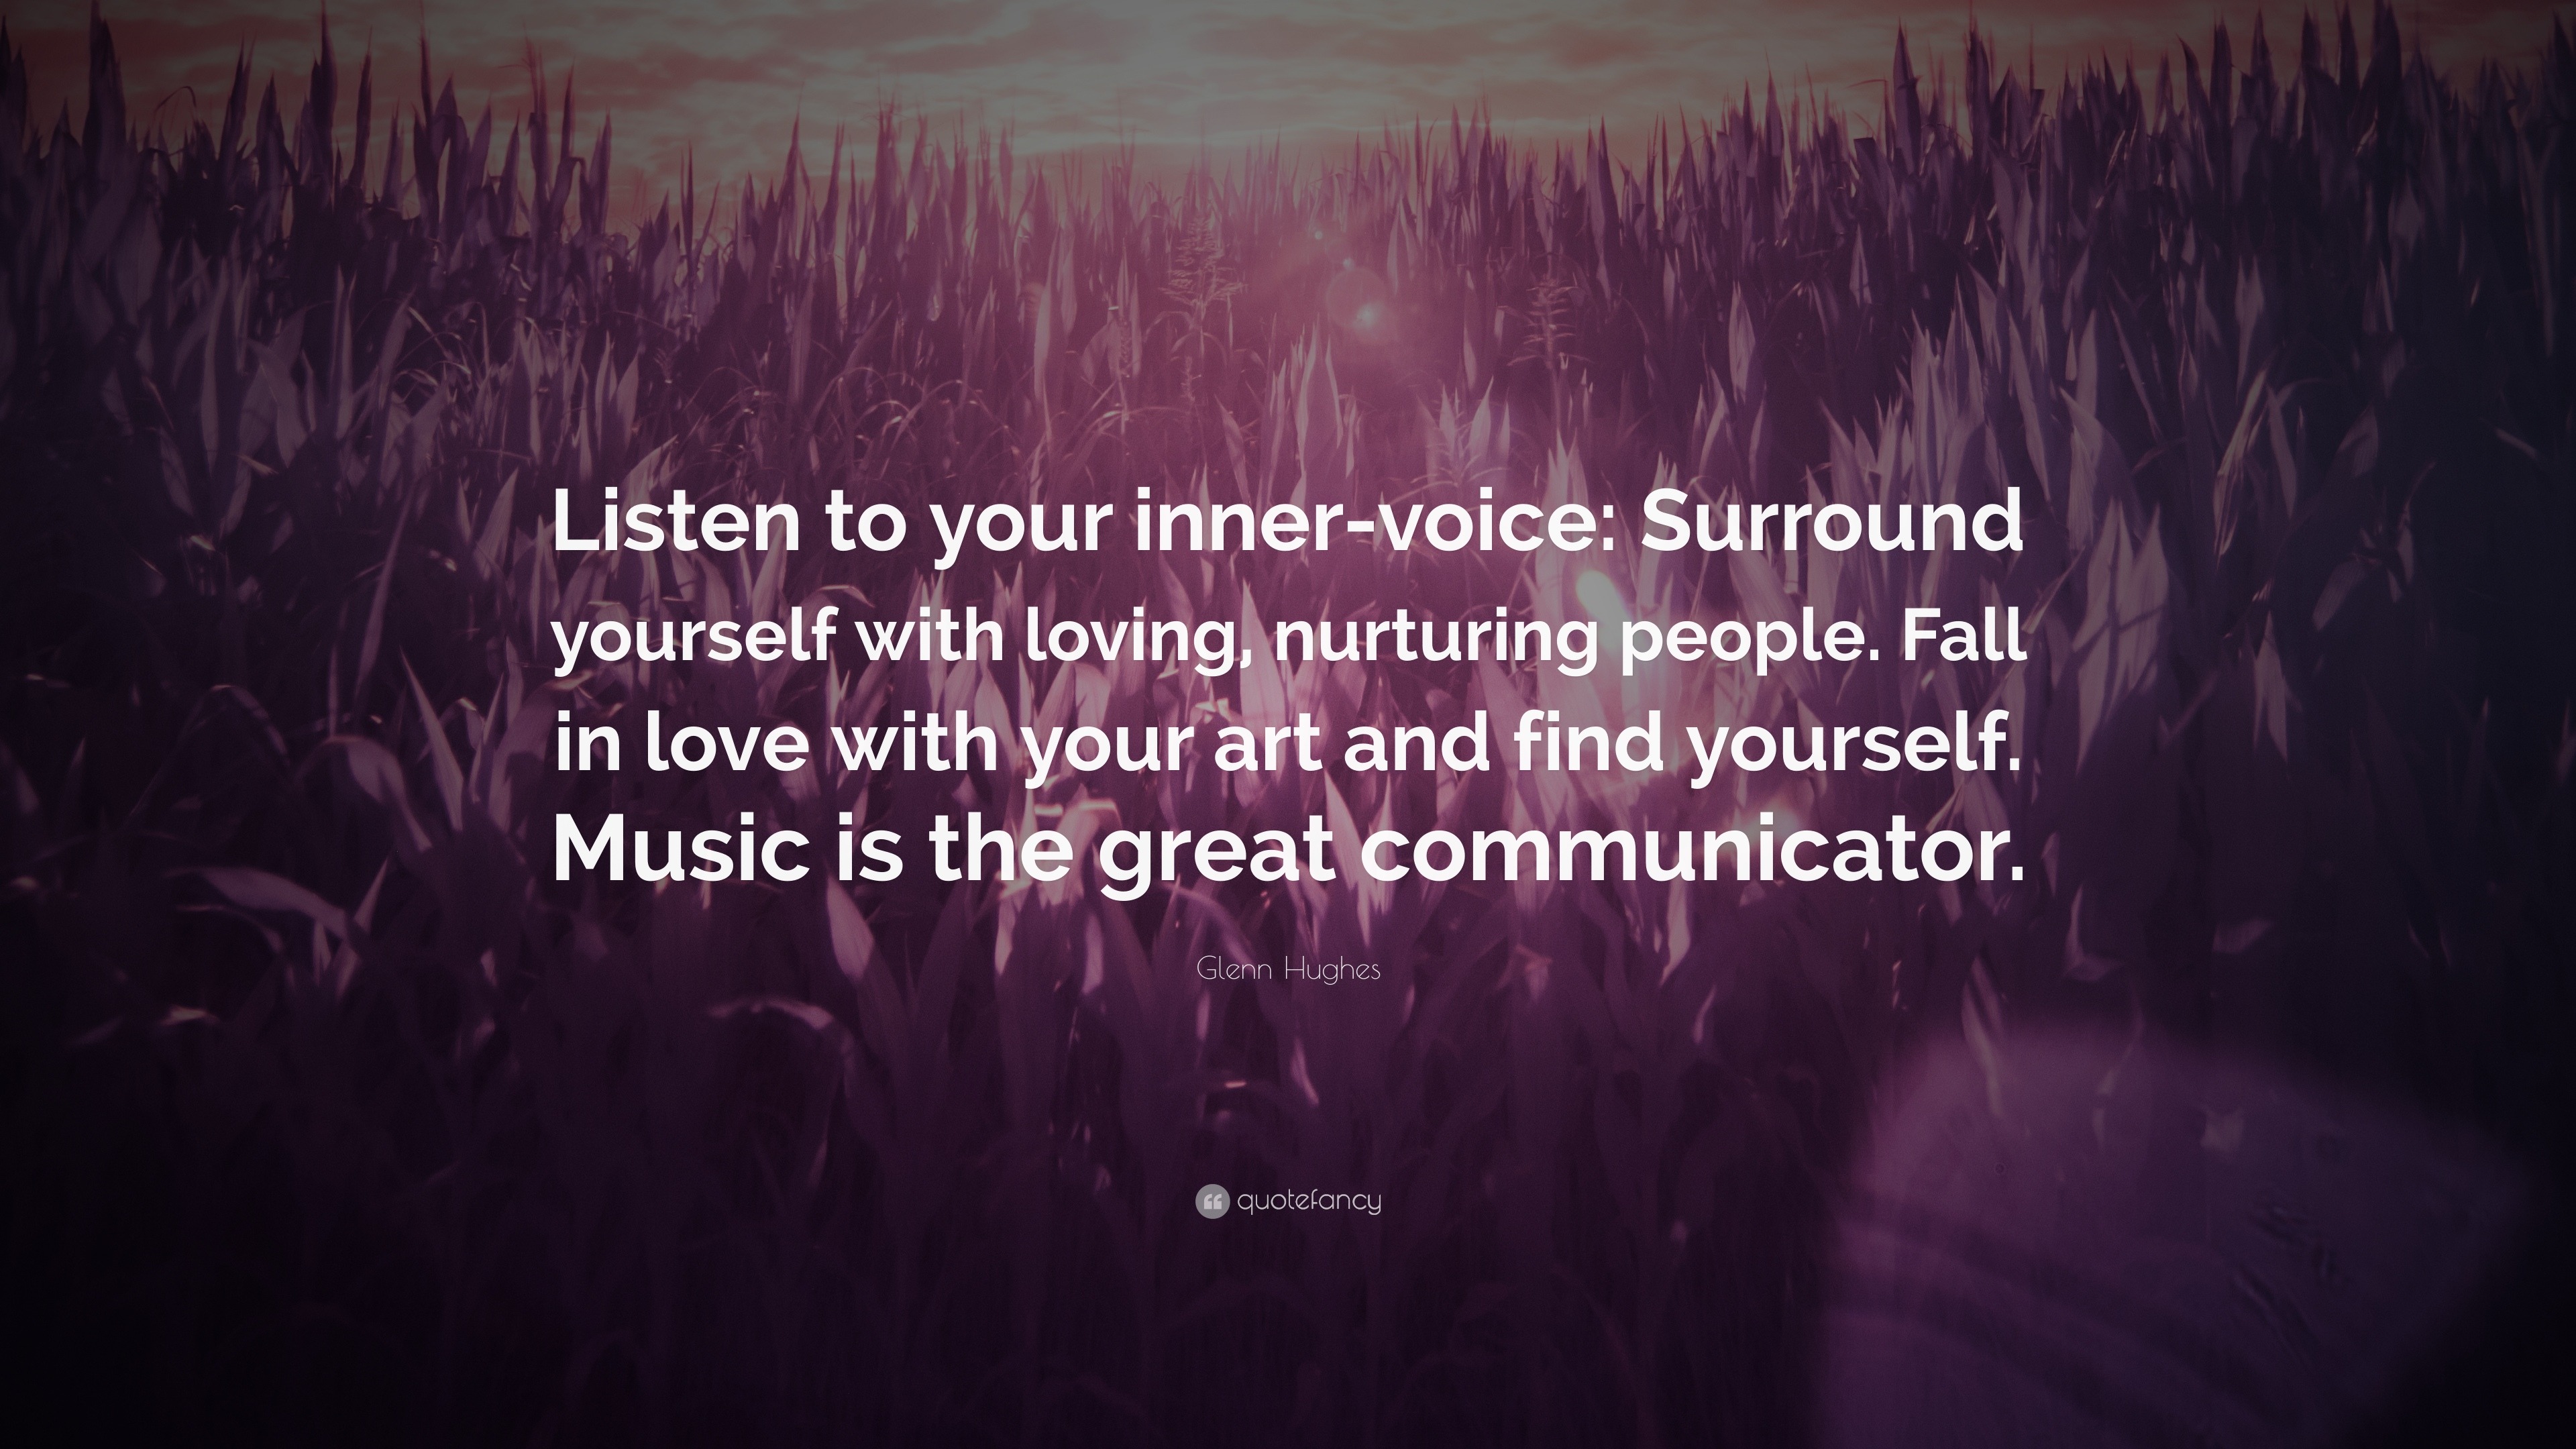 Glenn Hughes Quote “Listen to your inner voice Surround yourself with loving